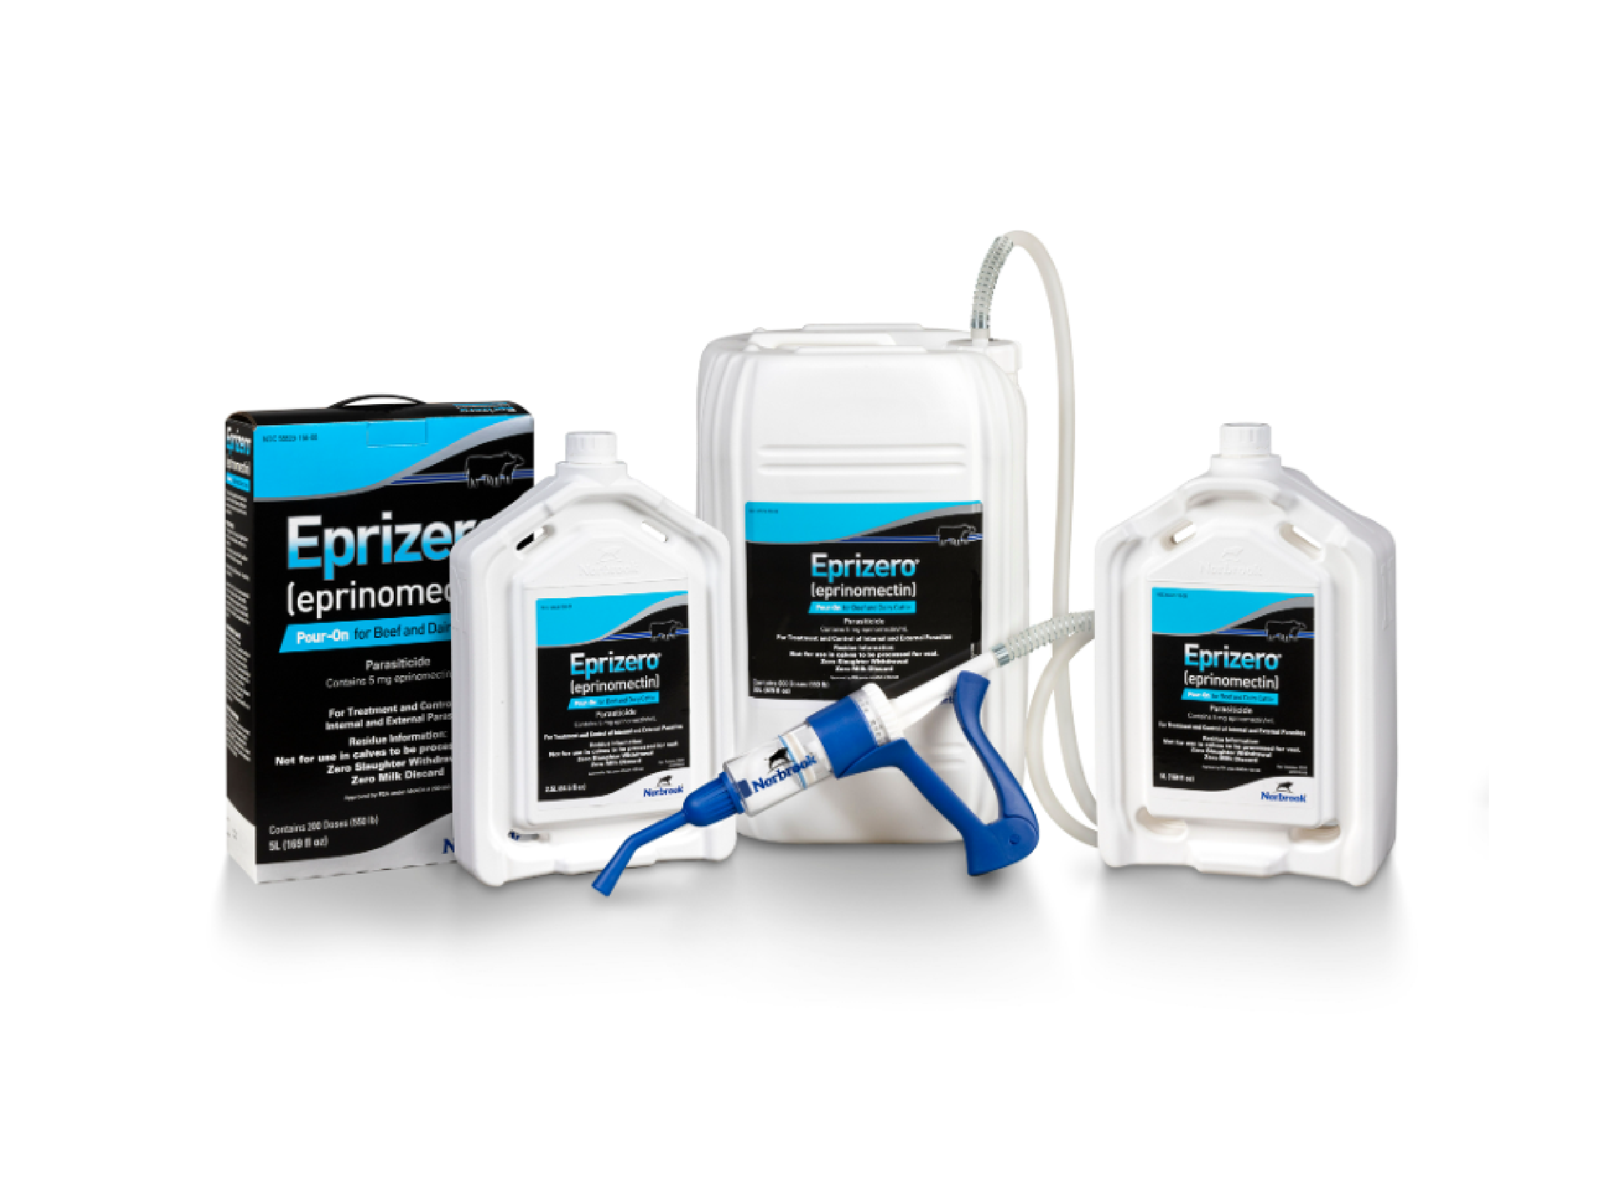 Eprizero® (eprinomectin) Pour-On for Beef and Dairy Cattle